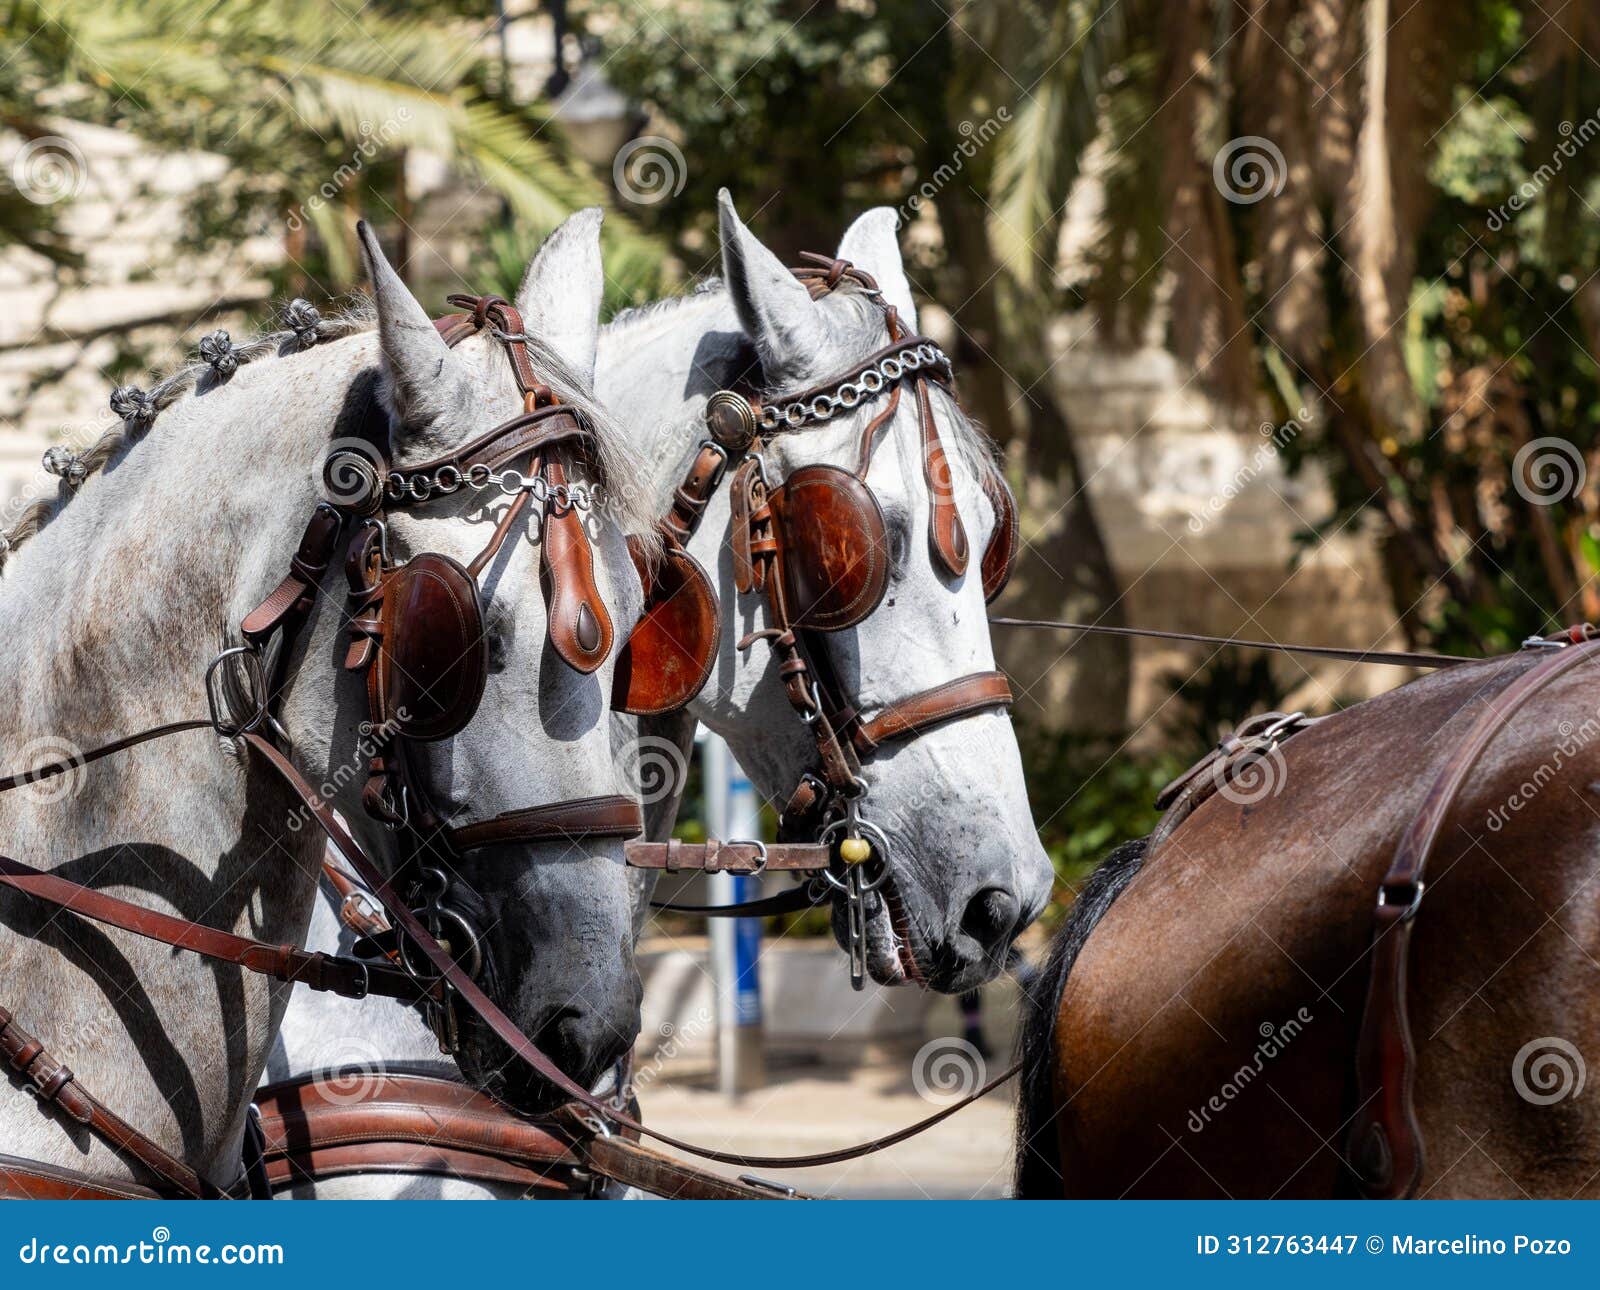 horses with saddlery details for carriage horses at the mÃ¡laga fair